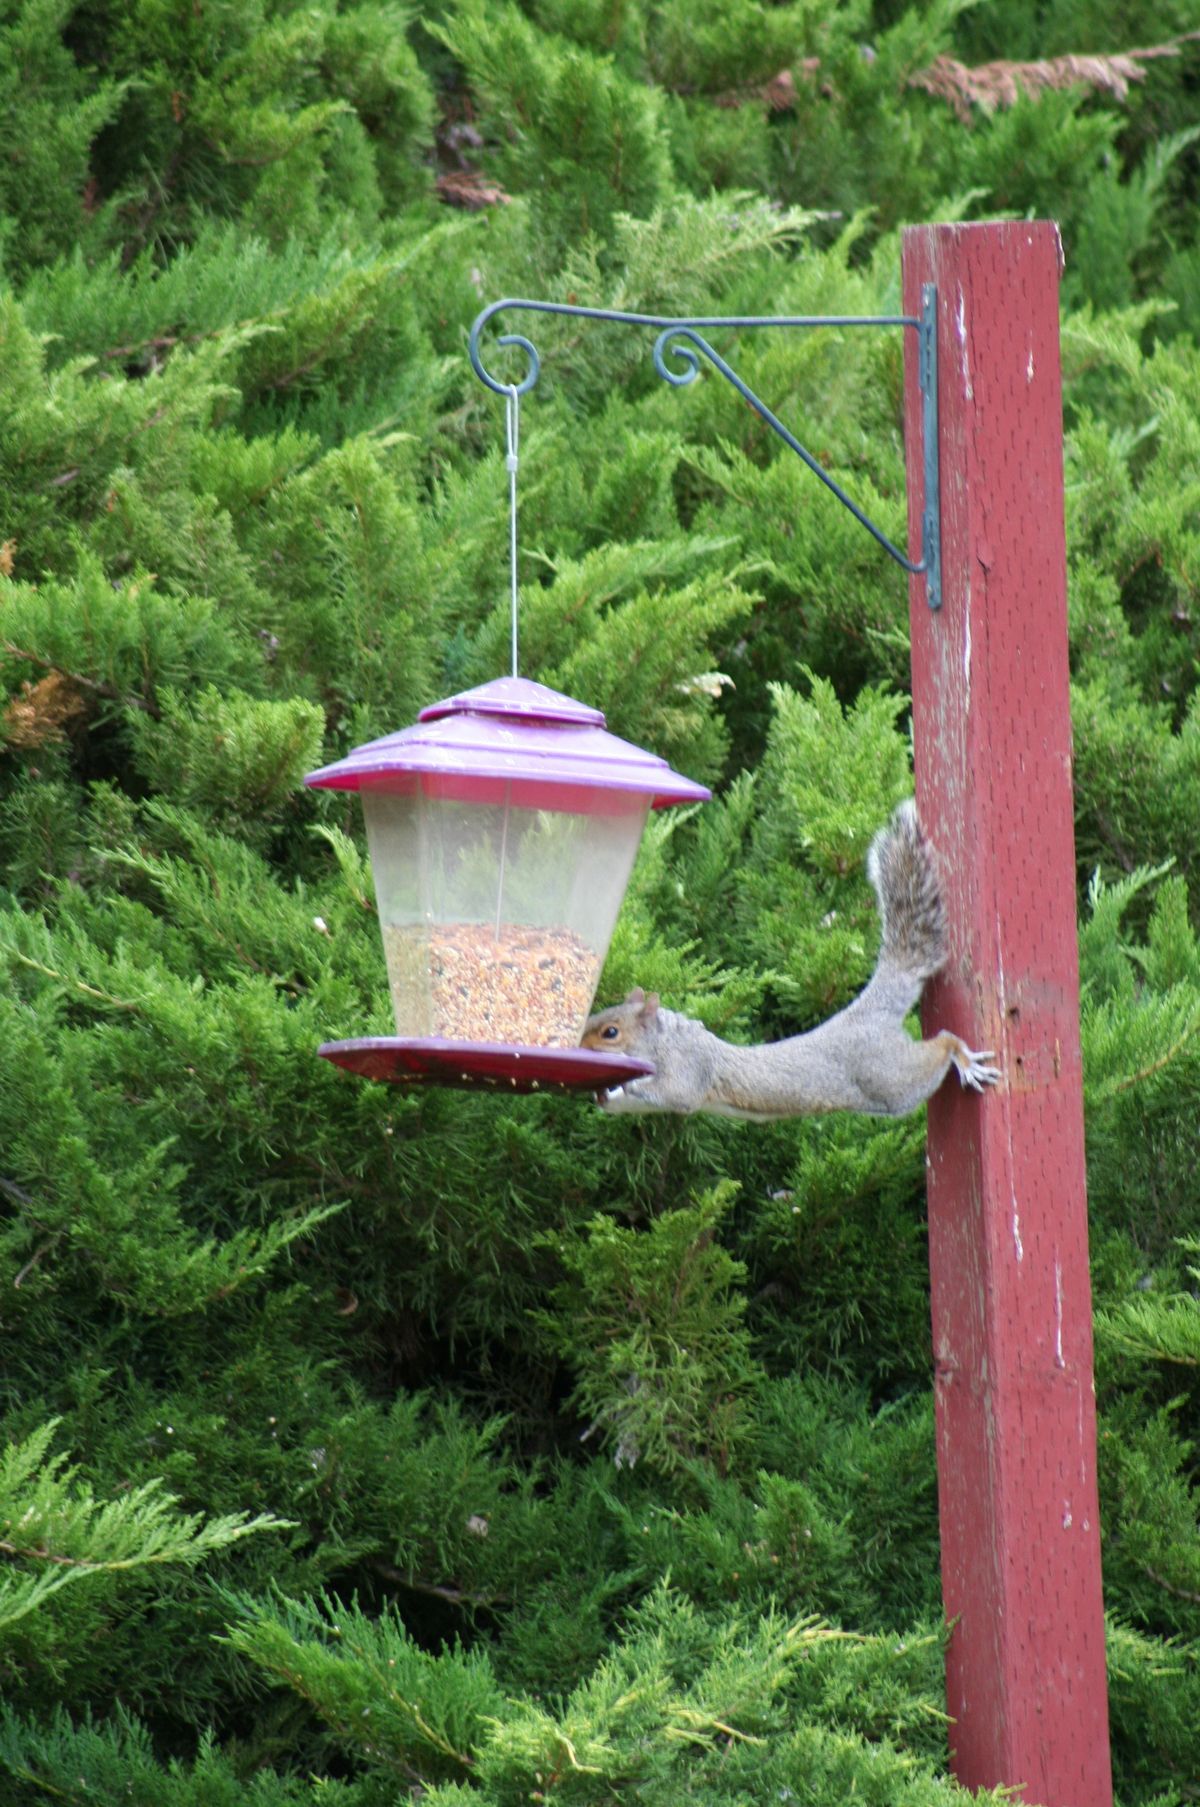 Spokane Valley’s Janice Suttner submitted this photo of “a determined squirrel eating from our bird feeder in our backyard” on June 14. (Janice Suttner)